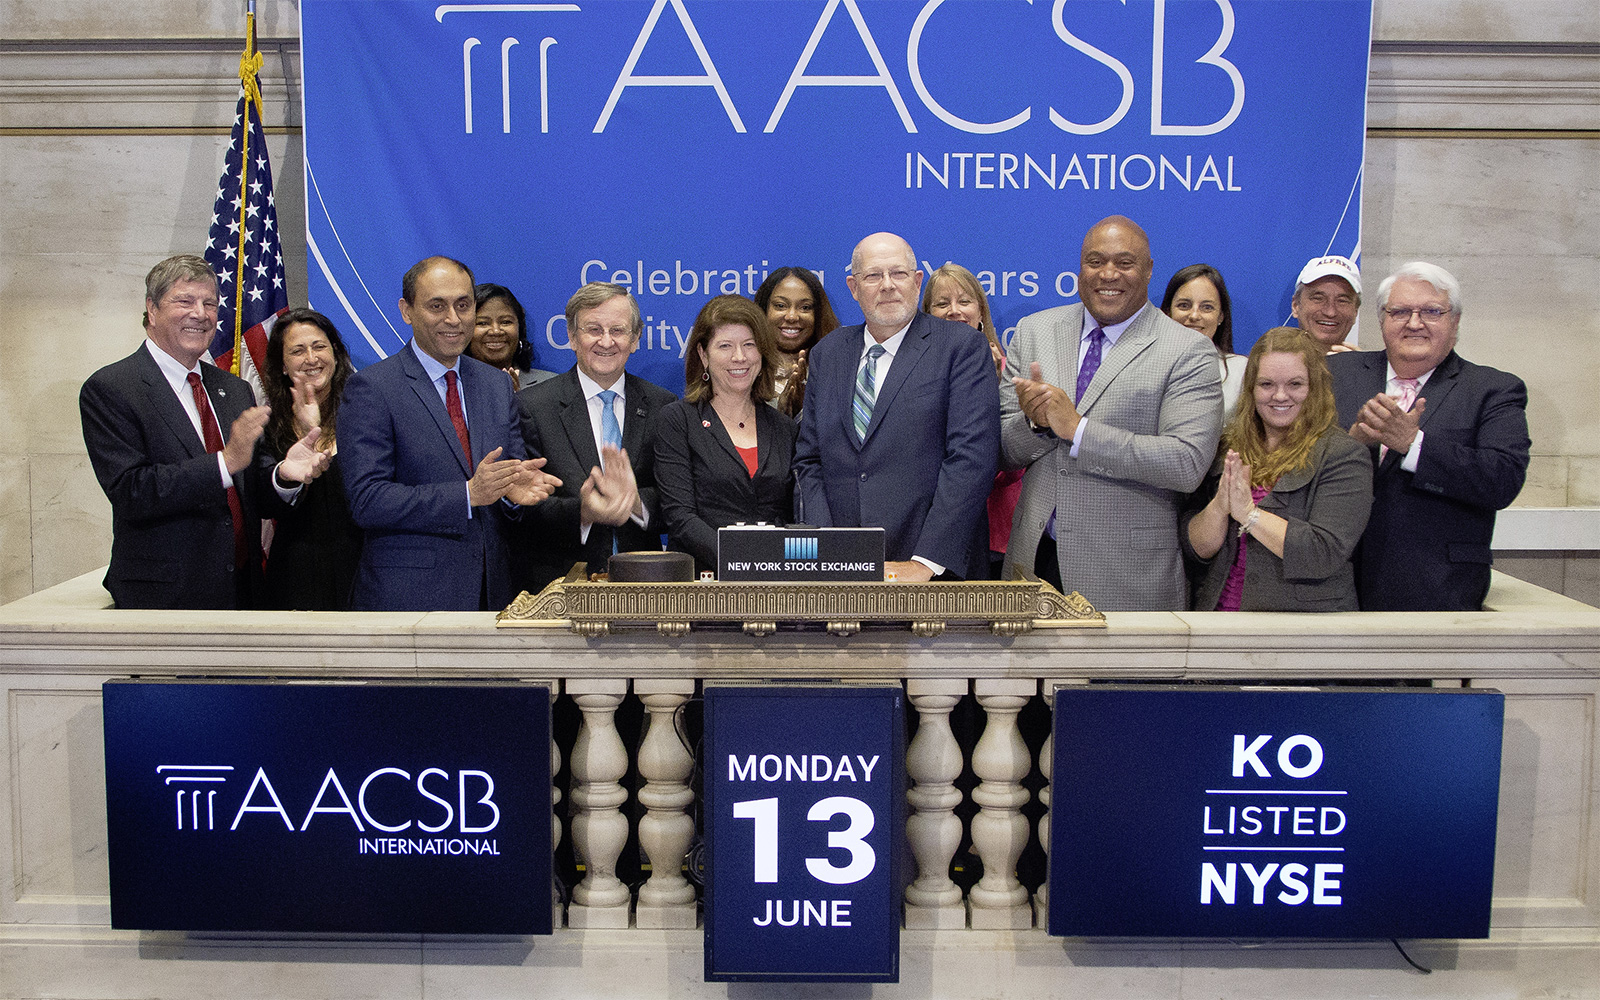 Representatives of AACSB International—the Association to Advance Collegiate Schools of Business, including board member John A. Elliott, dean of the UConn School of Business (far left) rang the closing bell of the New York Stock Exchange on Monday, June 13th in celebration of the organization’s 100th anniversary. The longest serving global association dedicated to advancing management education worldwide, AACSB accredits 761 of the world’s best business schools across 52 countries and territories. The UConn School of Business has been accredited since 1958.